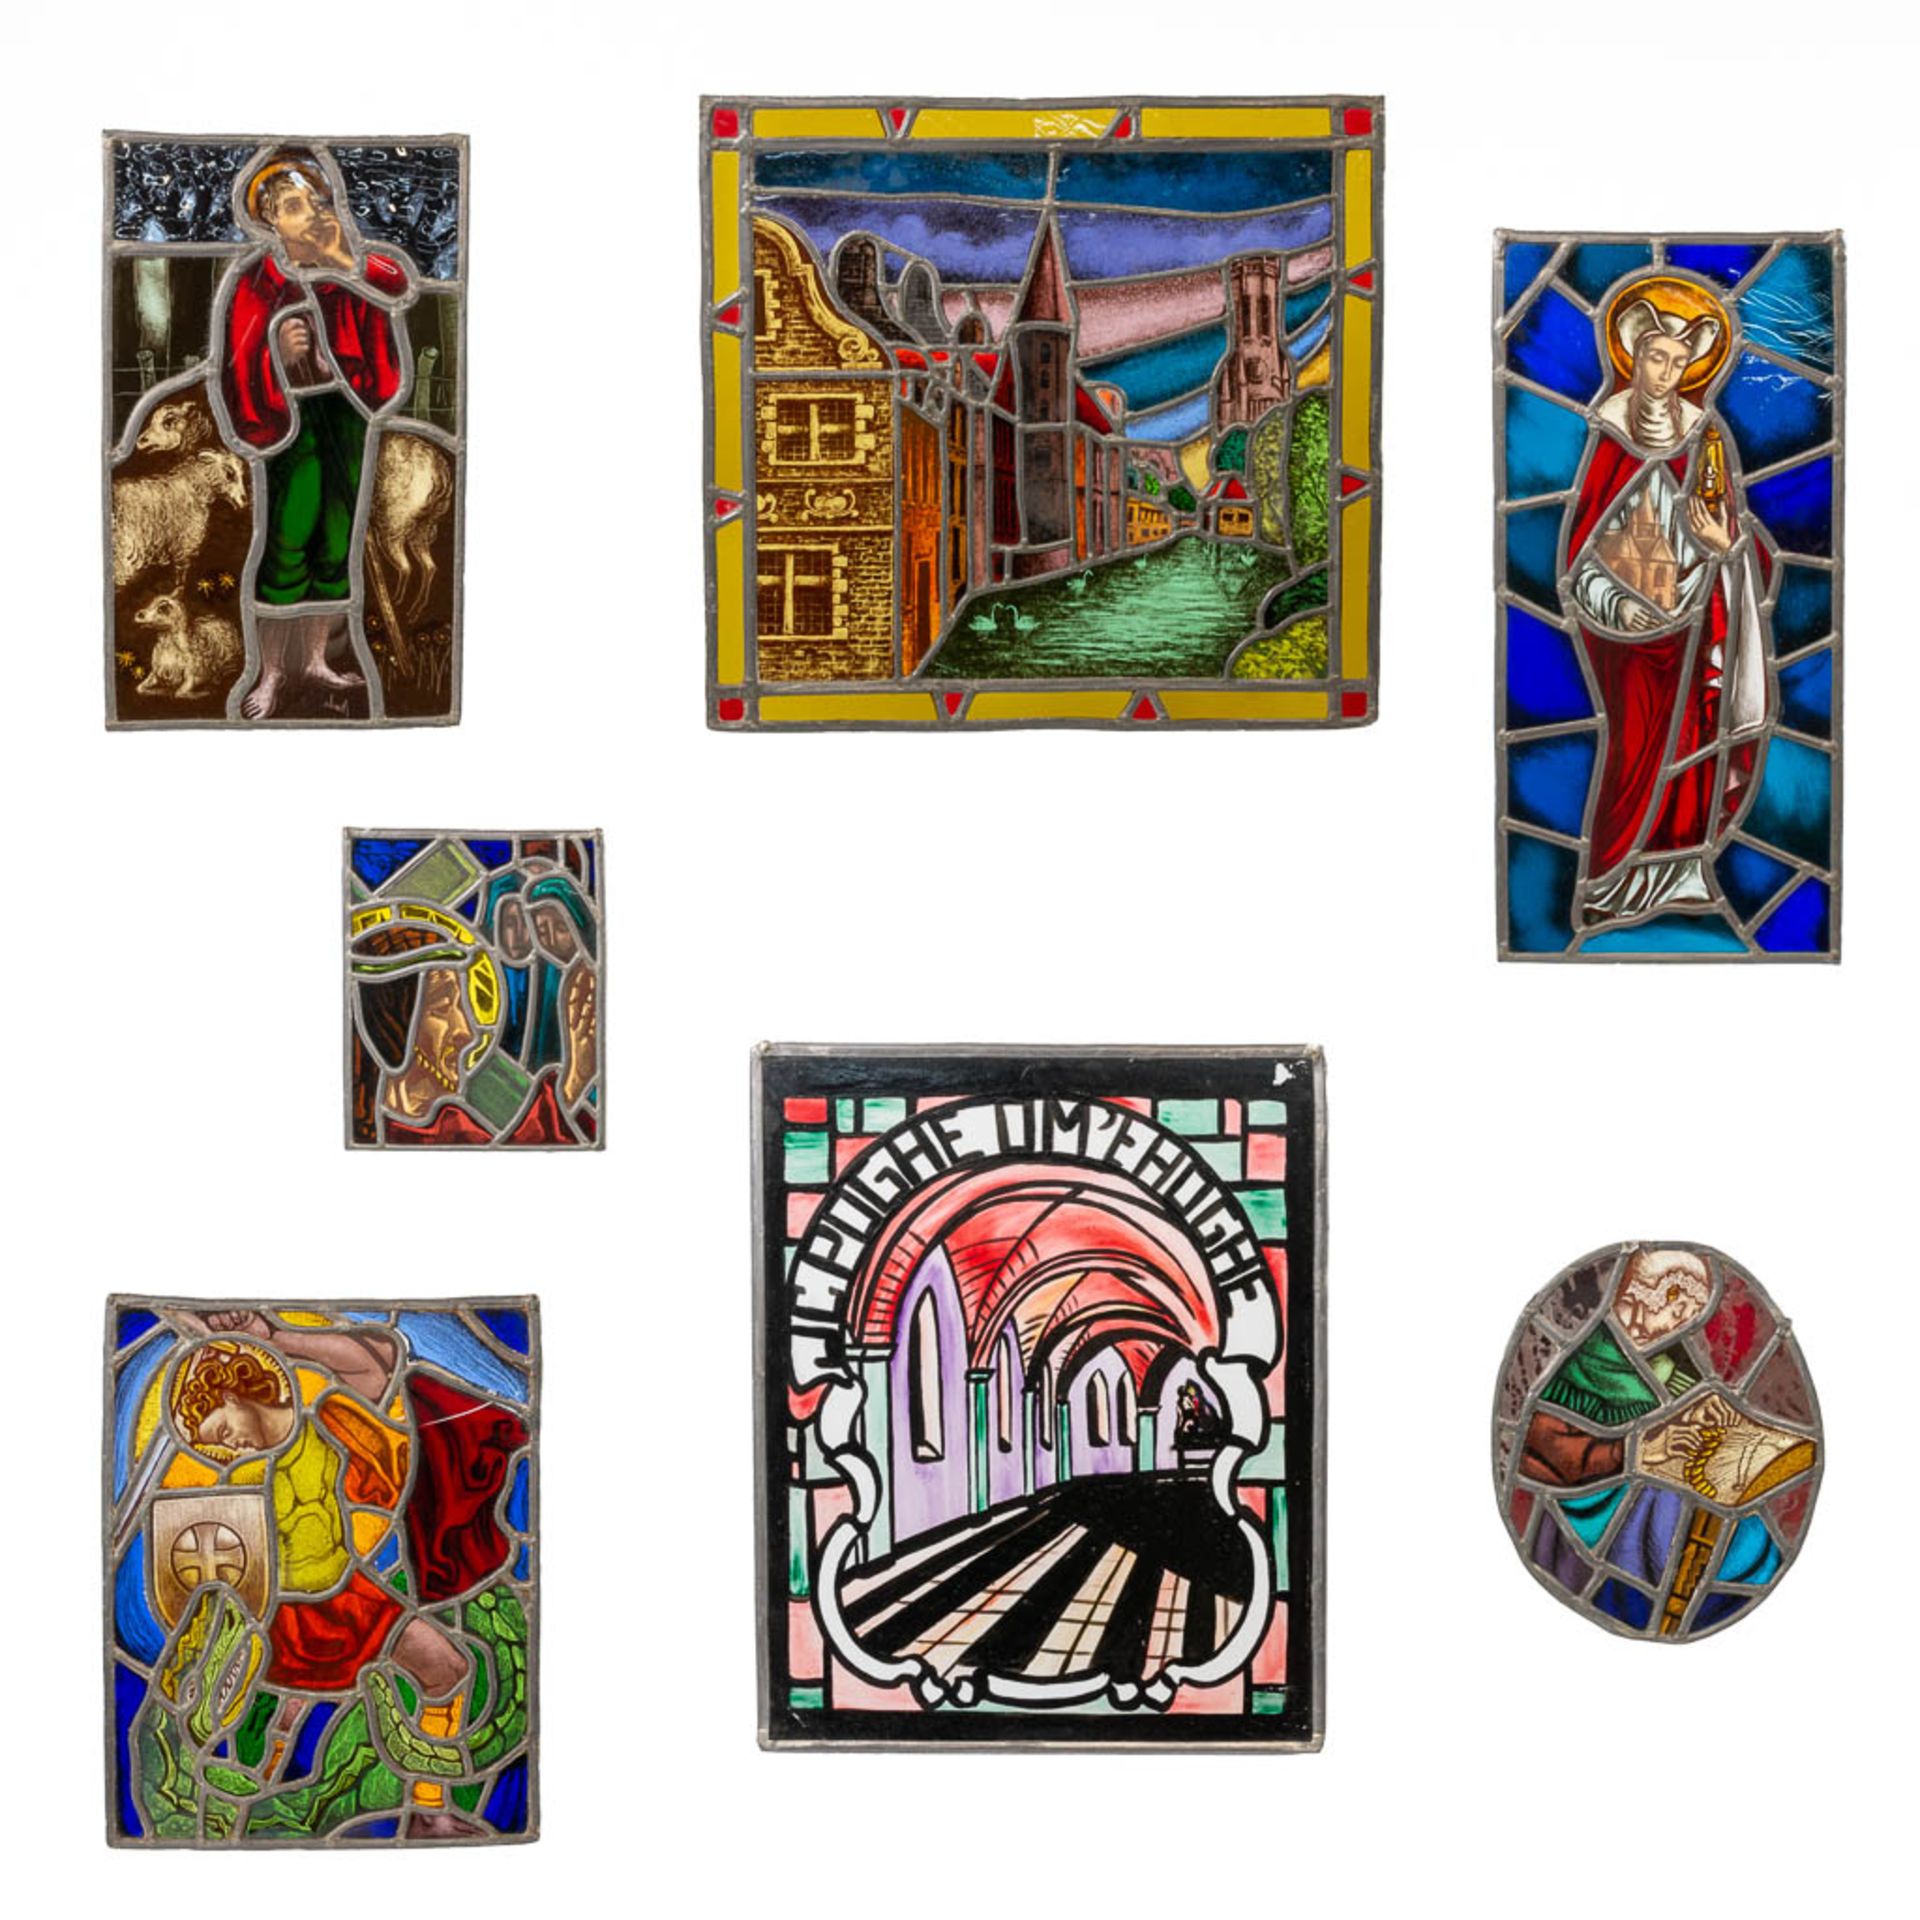 A collection of 7 Stained glass in lead window decorations, with religious decor and a view of Bruge